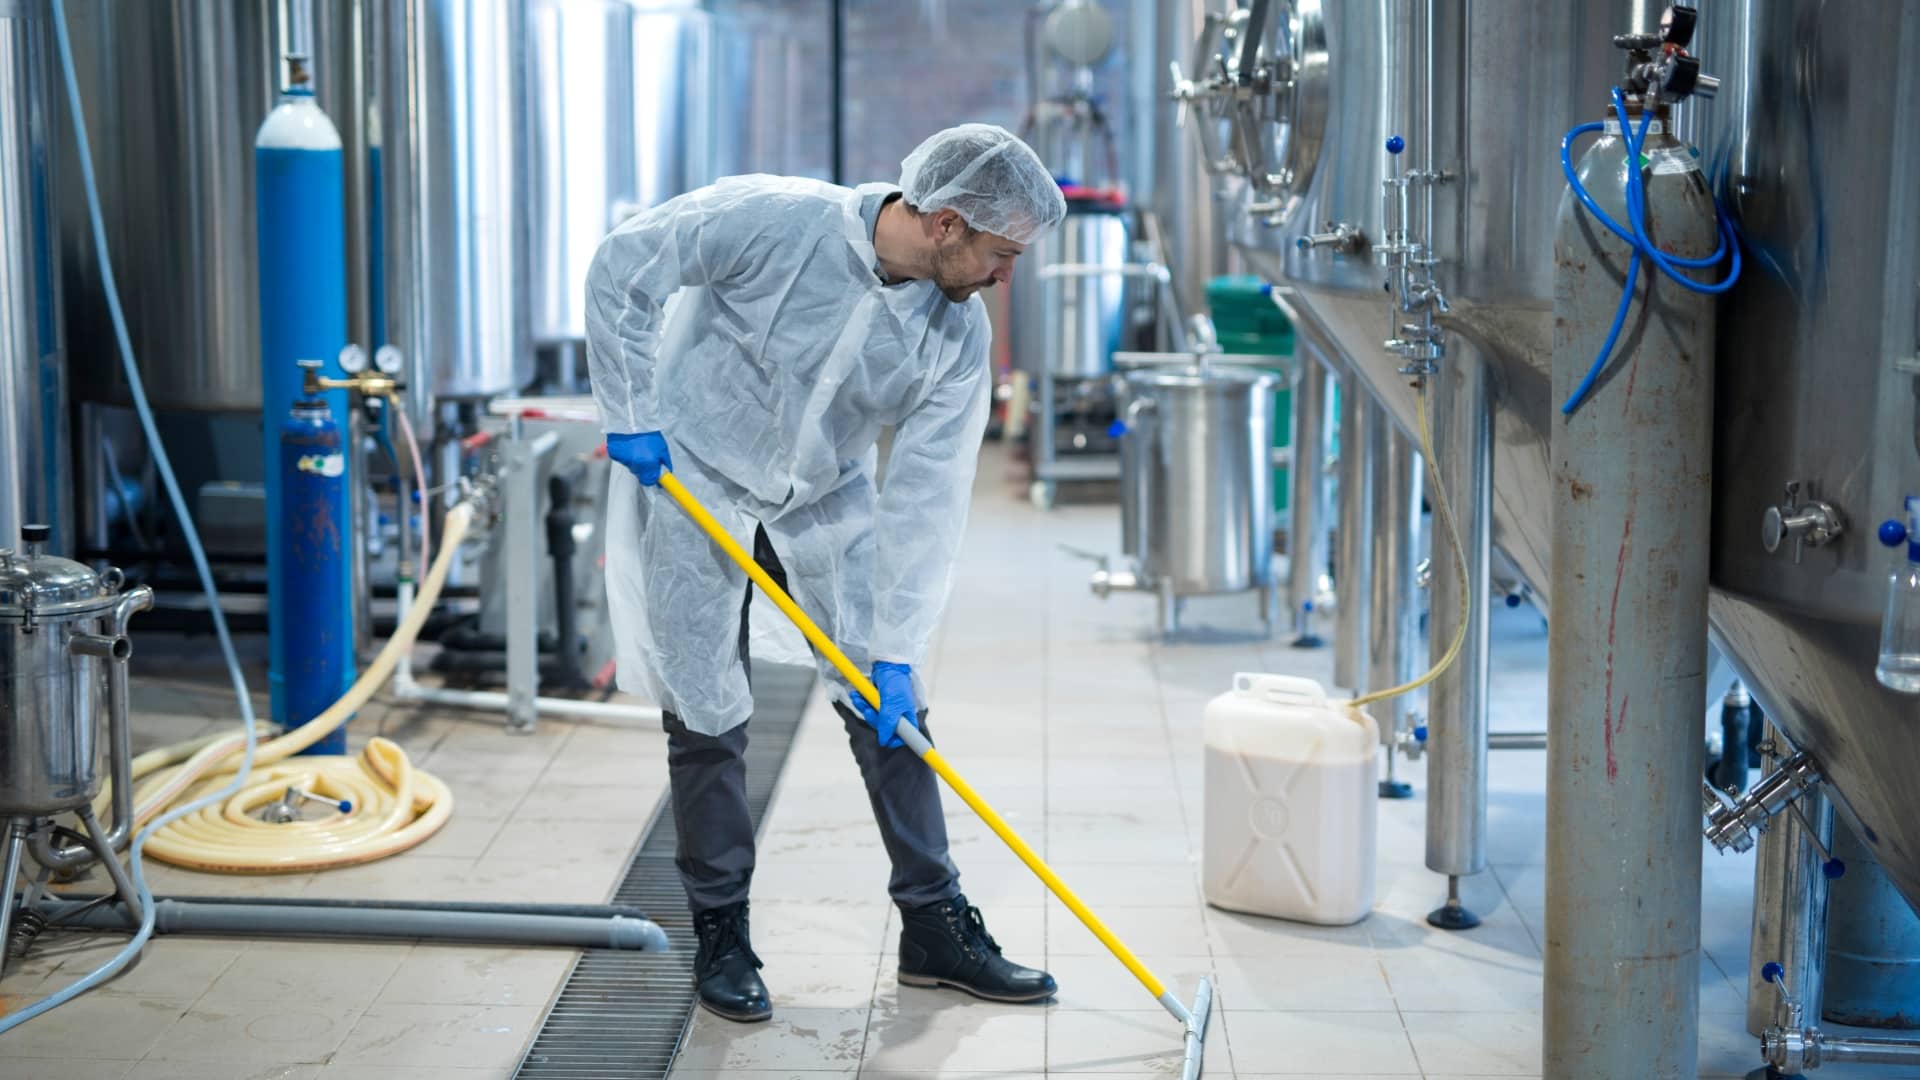 A photo of a man in protective gear, cleaning at a factory.